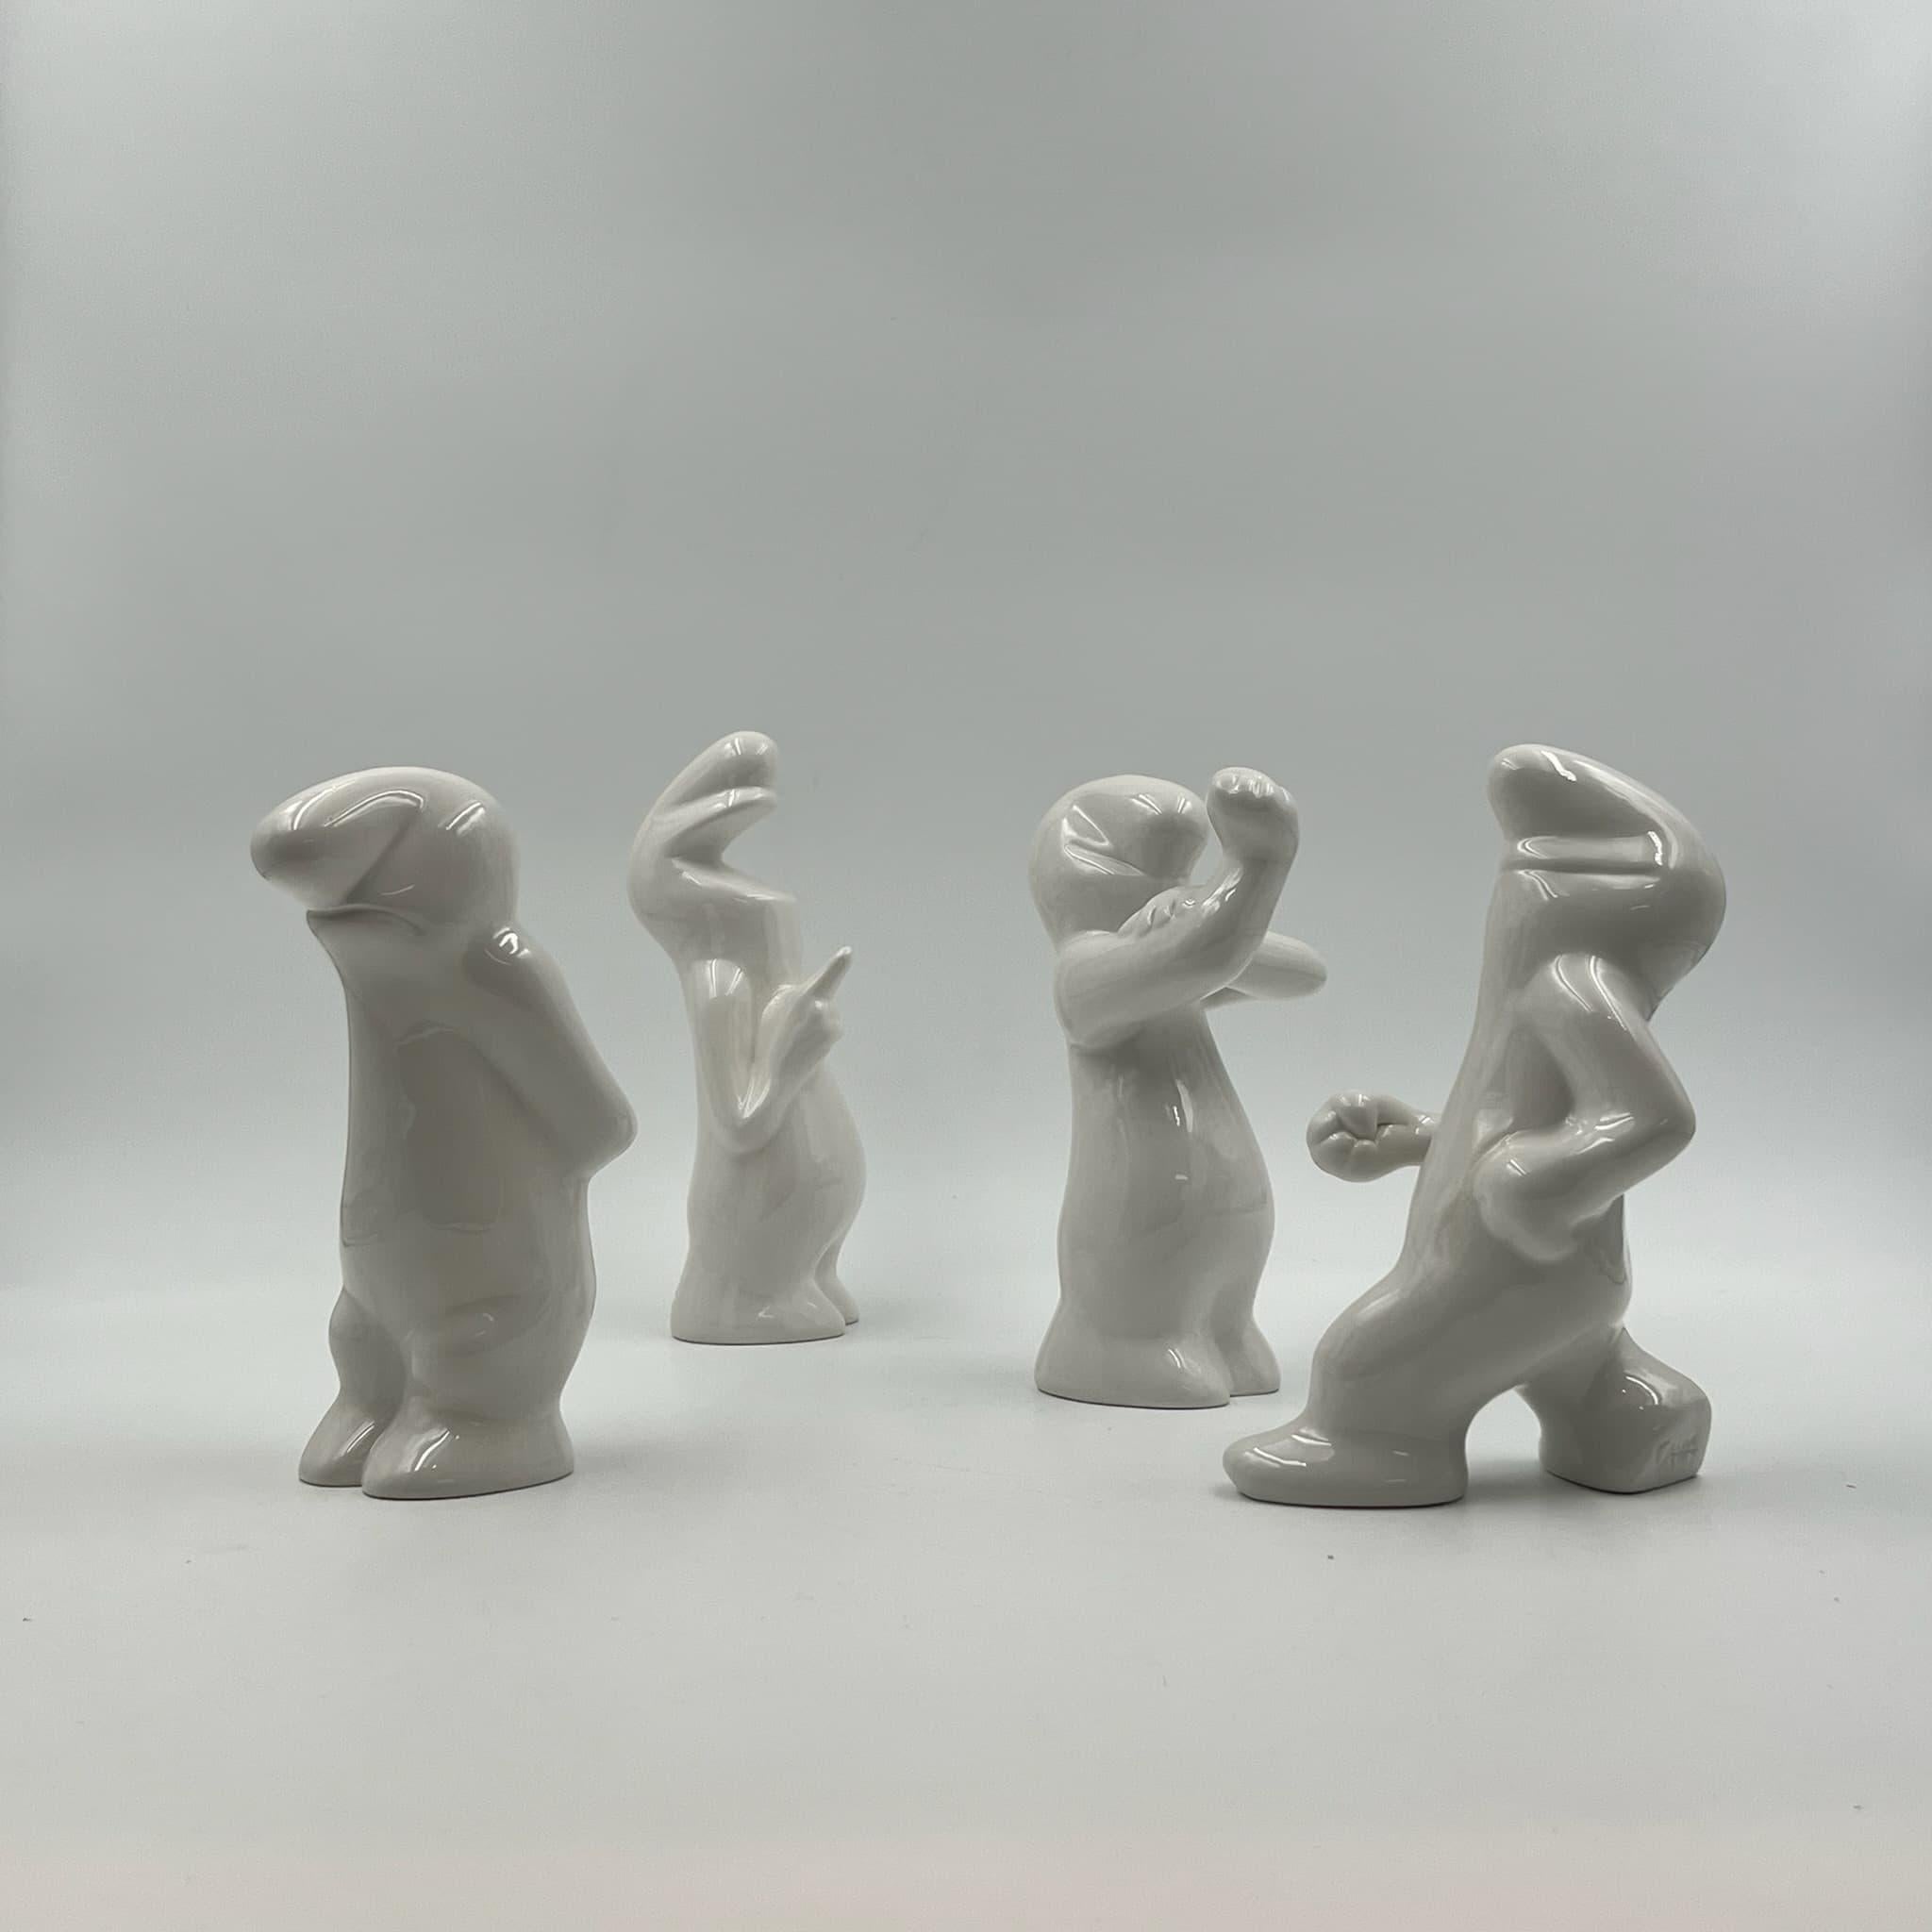 Delve into the world of collectible art with this unfindable set of four collectible ceramic sculptures from the iconic ‘La Linea’ series, designed and crafted by Osvaldo Cavandoli from the late 1950s to the 1970s. Each figurine captures the essence